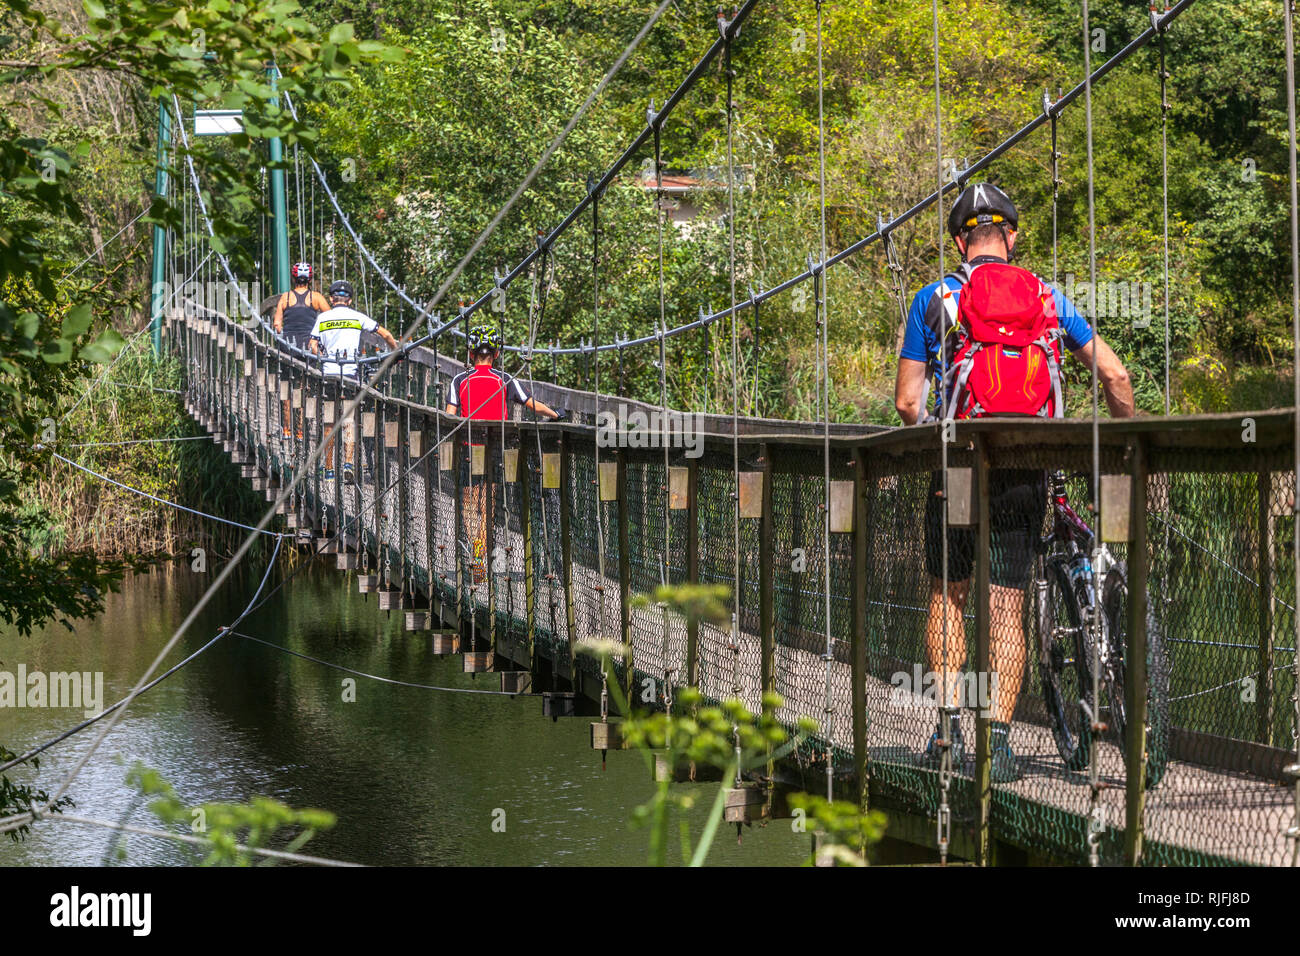 Cyclists on a trip ride on a bridge across the Dyje River in Podyji National Park, South Moravia, Czech Republic Stock Photo